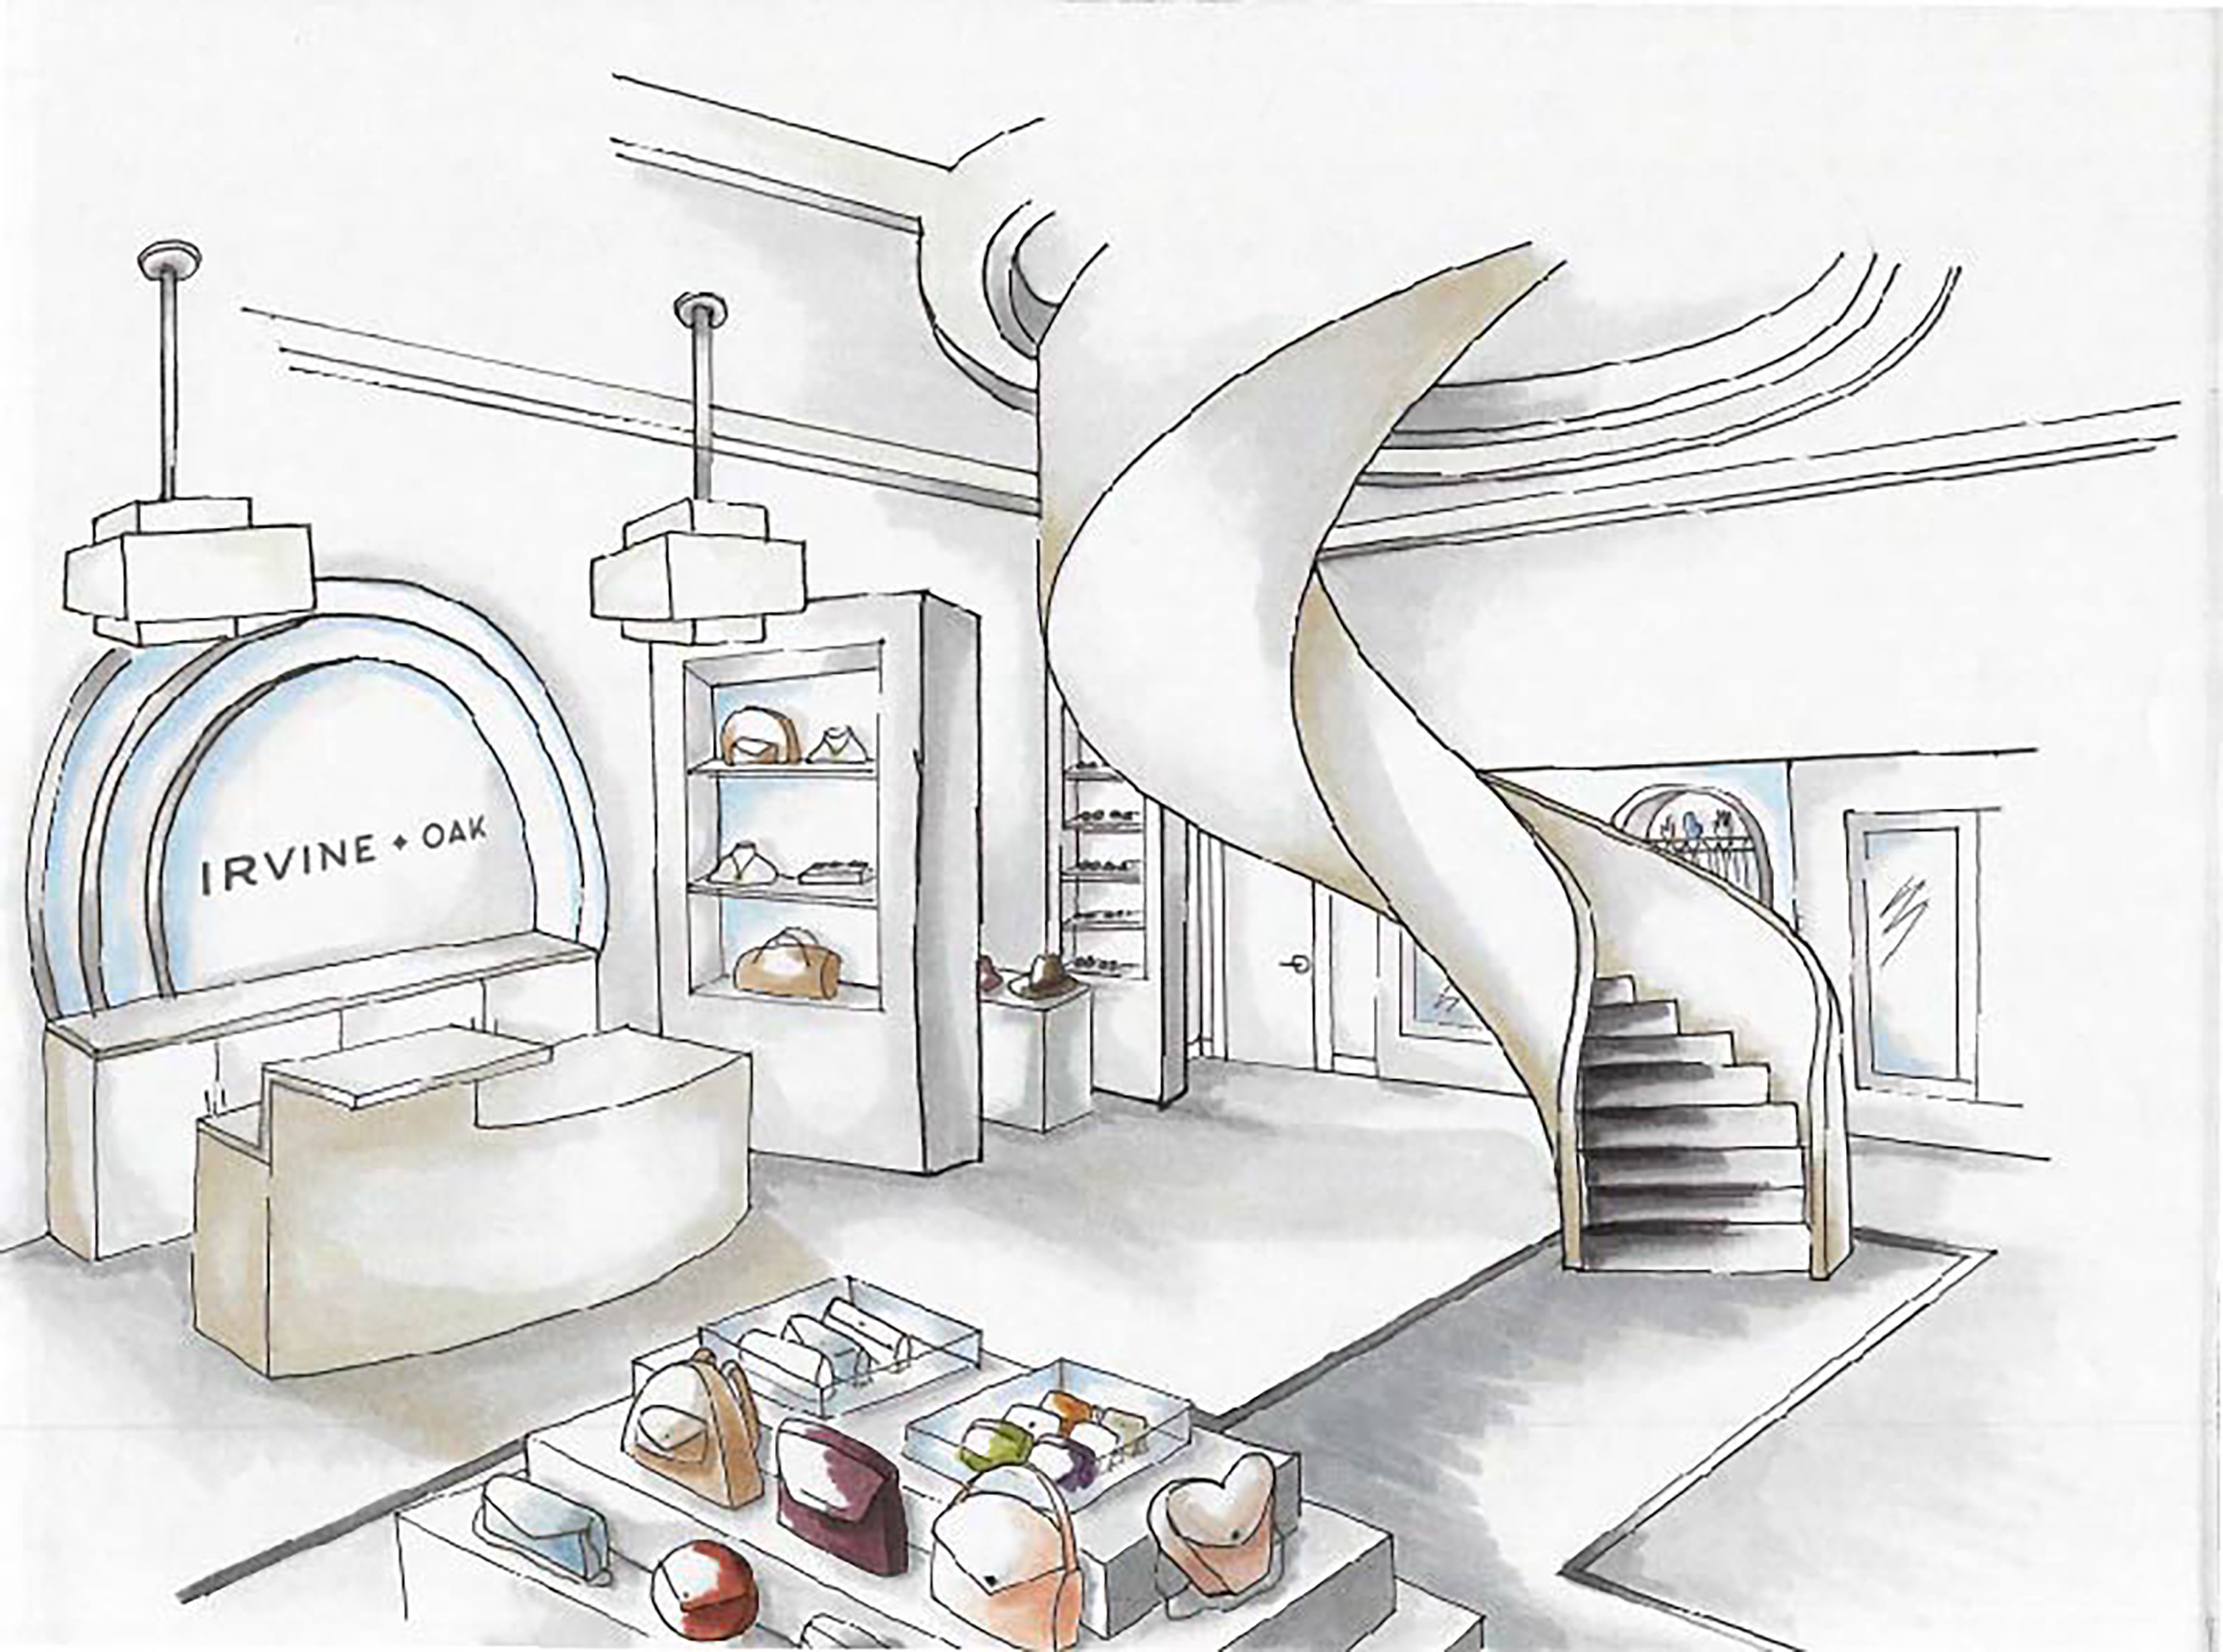 Hand rendering of a retail space with a large spiral staircase in the center, and product displays surround it.